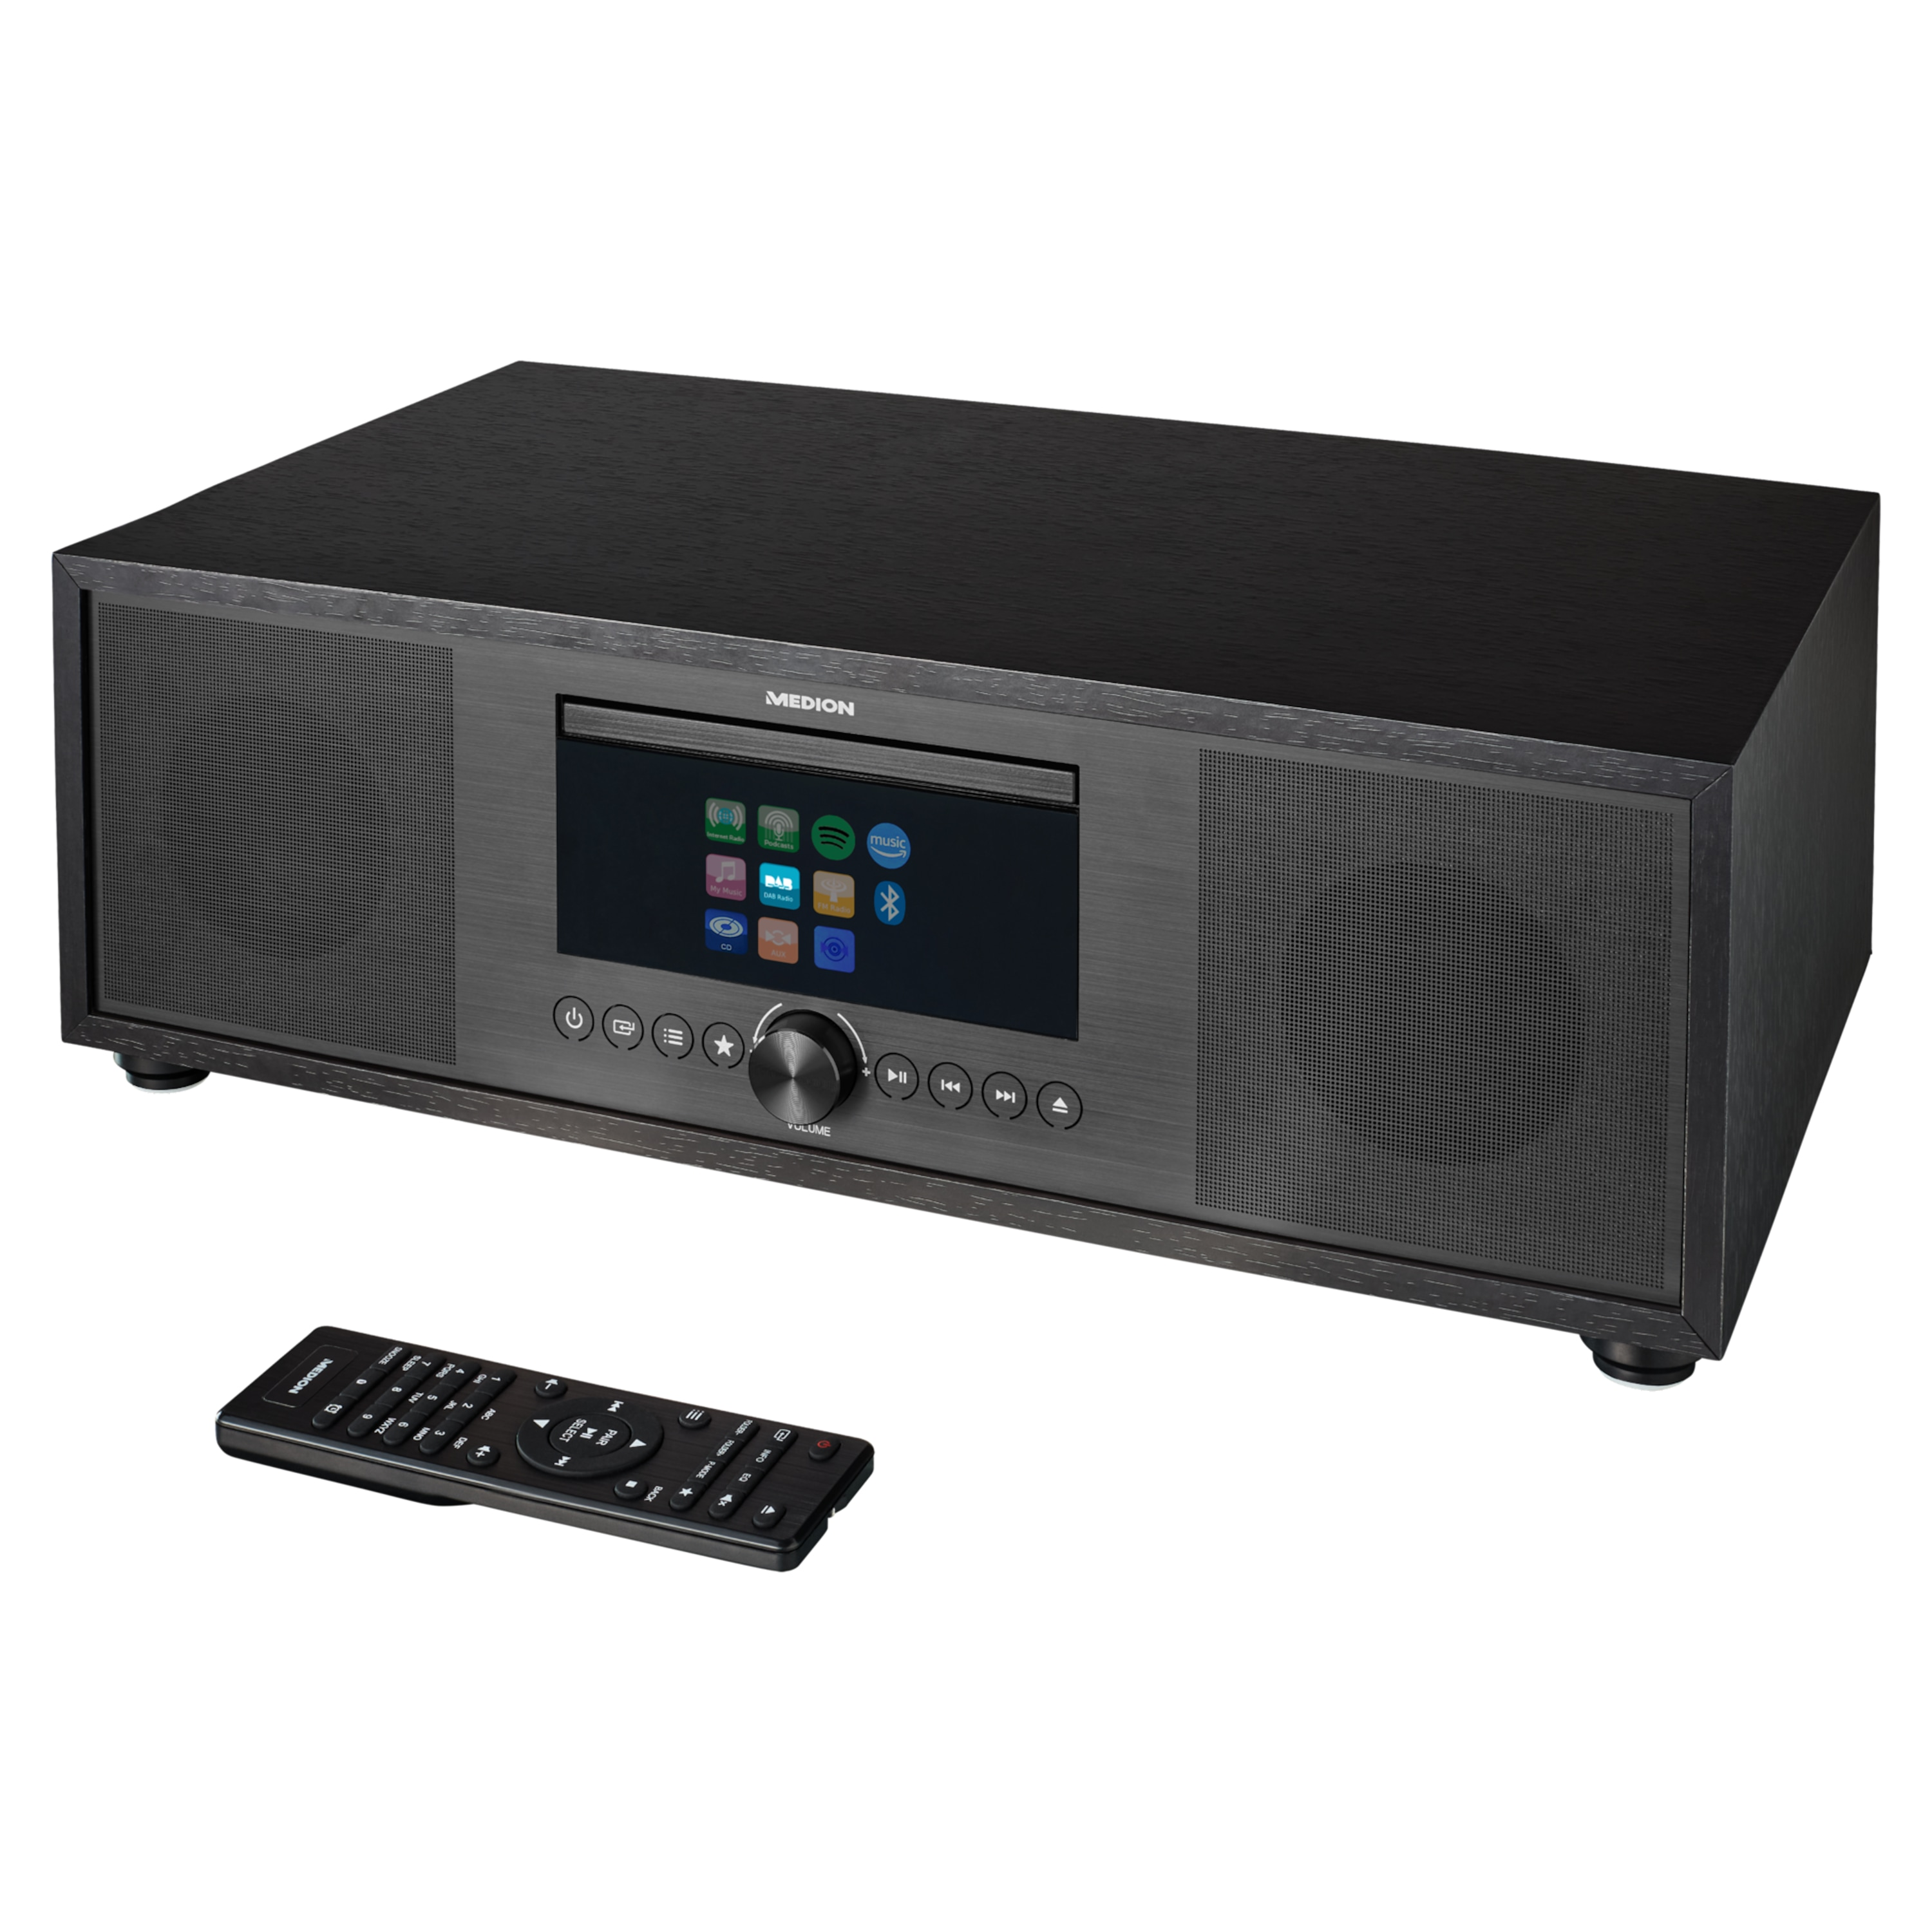 MEDION LIFE® P66400 All-in-One Audio Radio, CD/MP3- Internetradio, KW, WLAN Internet/DAB+/PLL-UKW Bluetooth®, System, Player, anthrazit